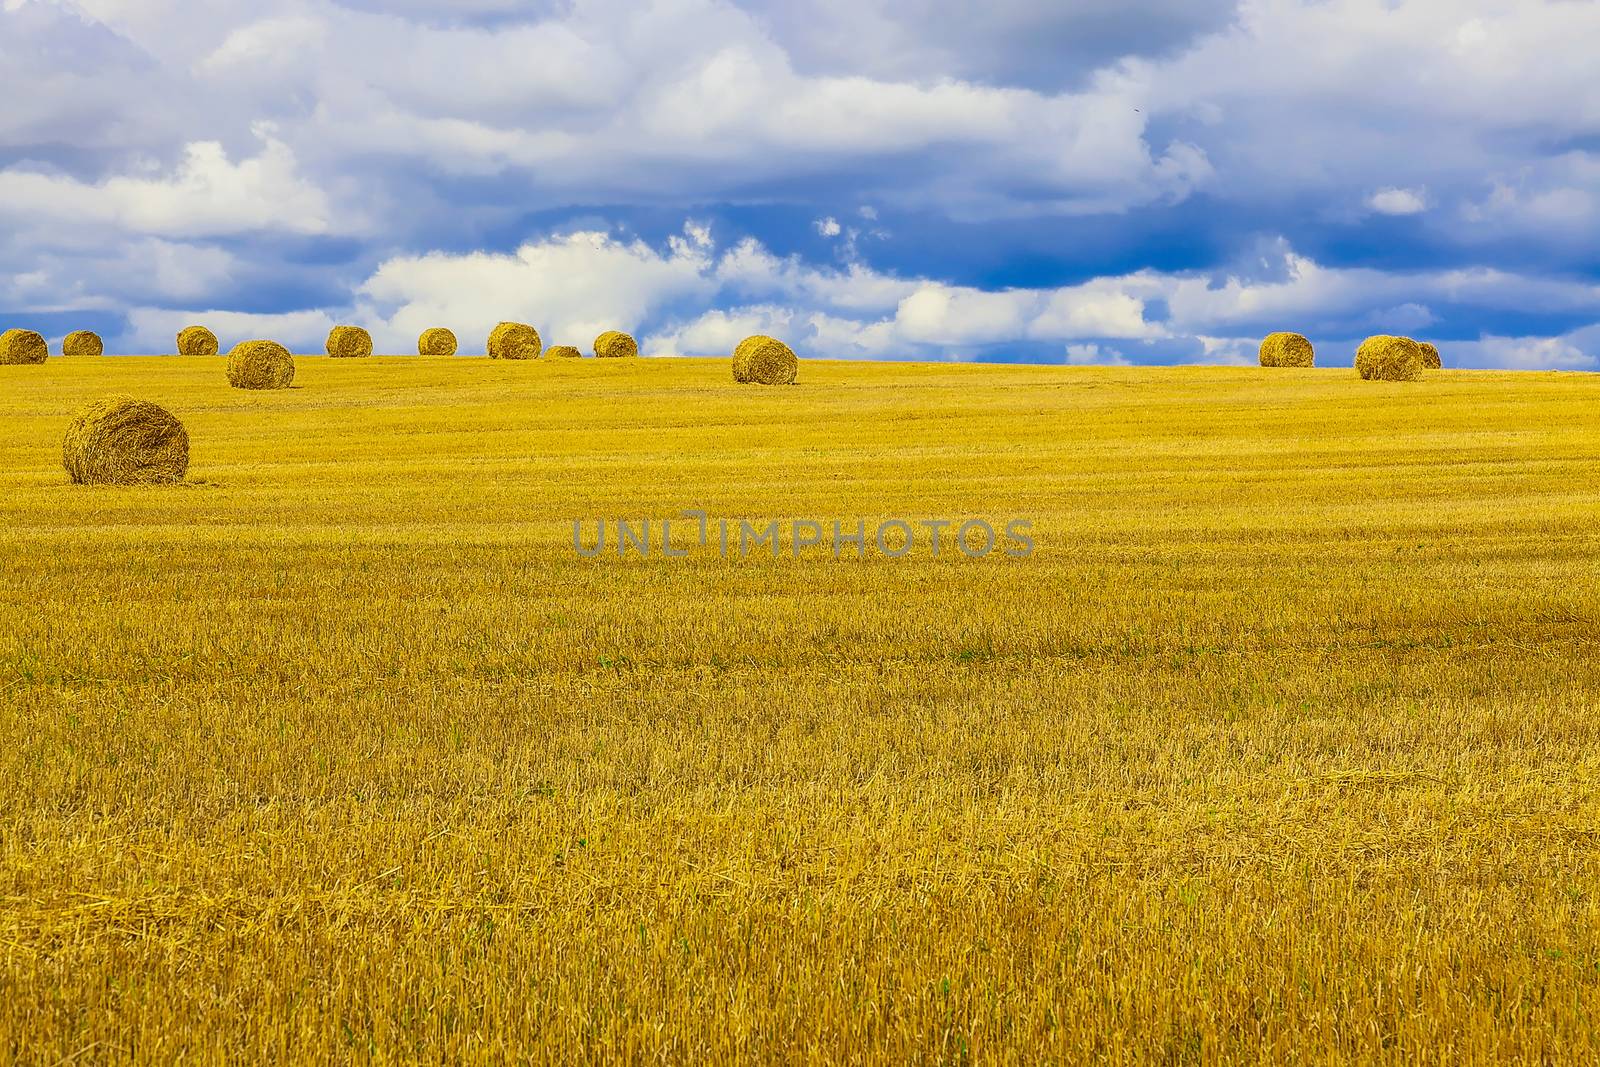 Yellow and Round Straw Bales in a Stubble Field at end of Summer at Day with Clouds and Blue Sky after Harvest